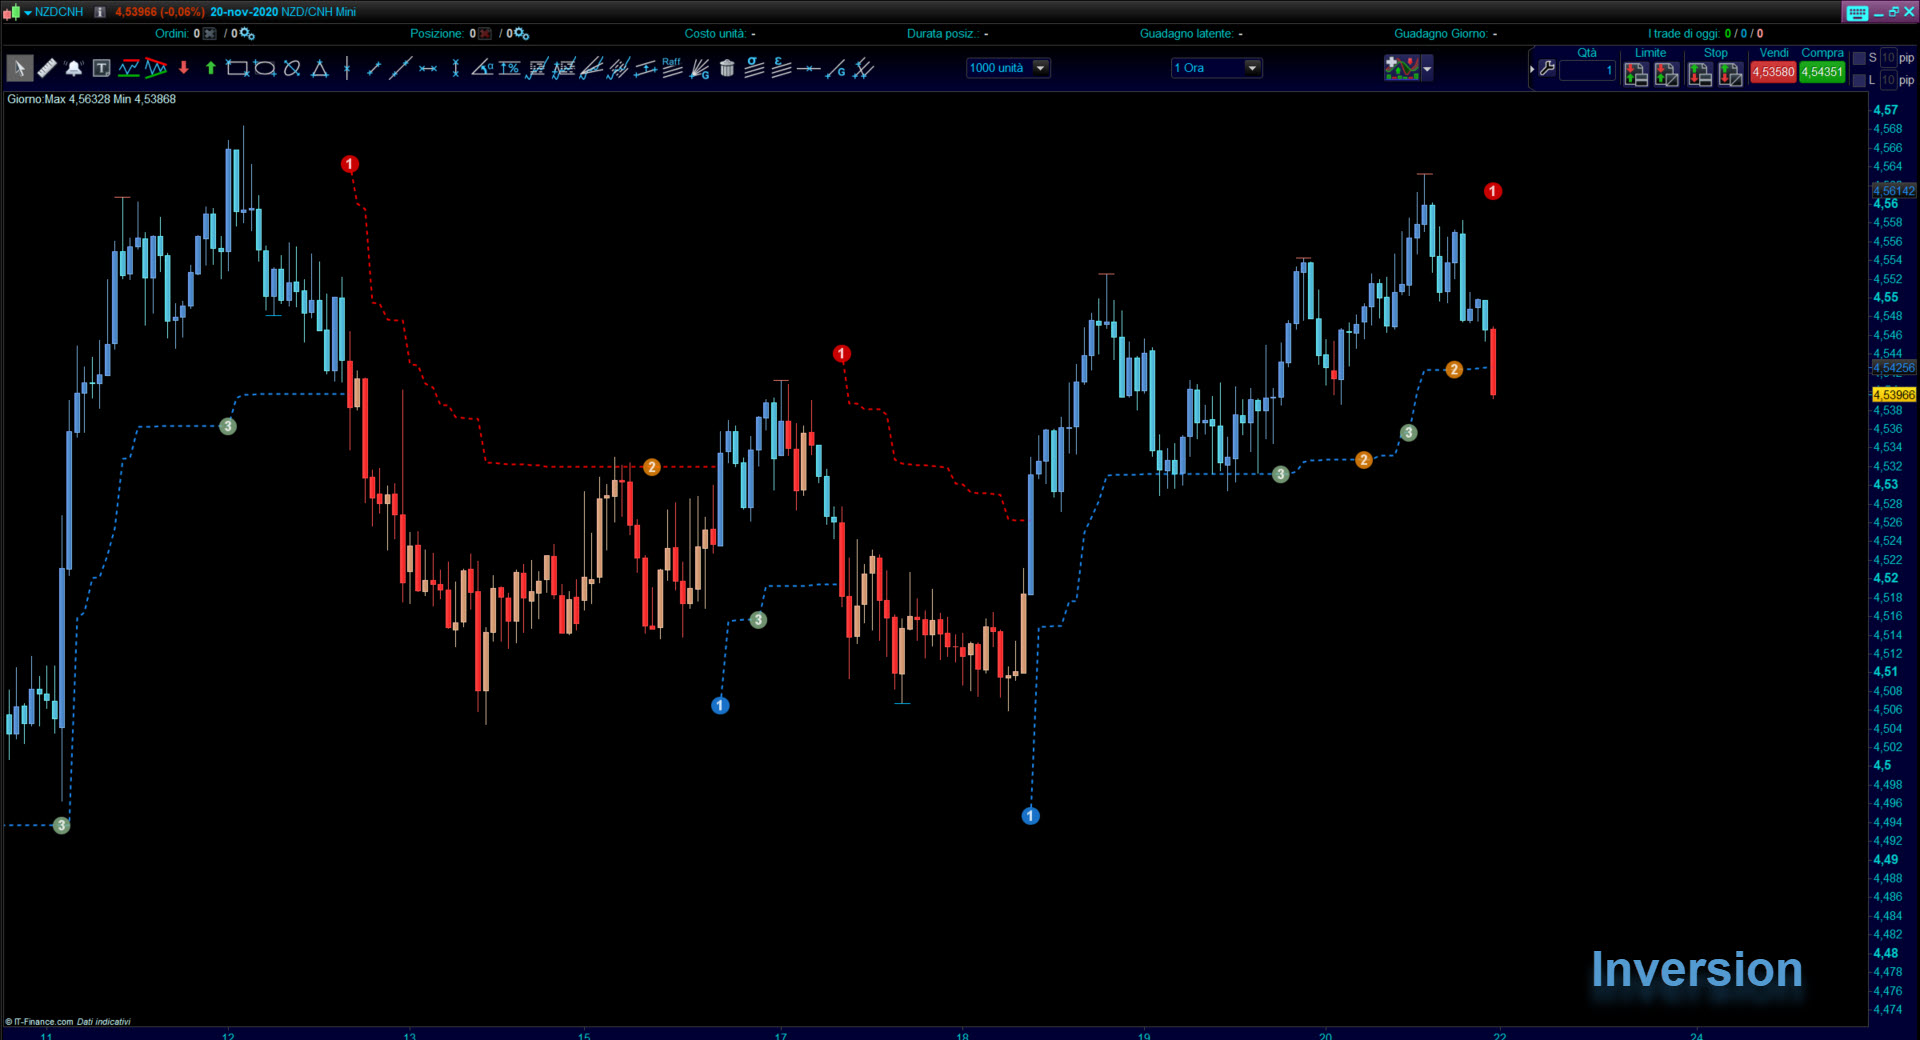 Trend Trading System Screener www.automatictrading.it Inversion